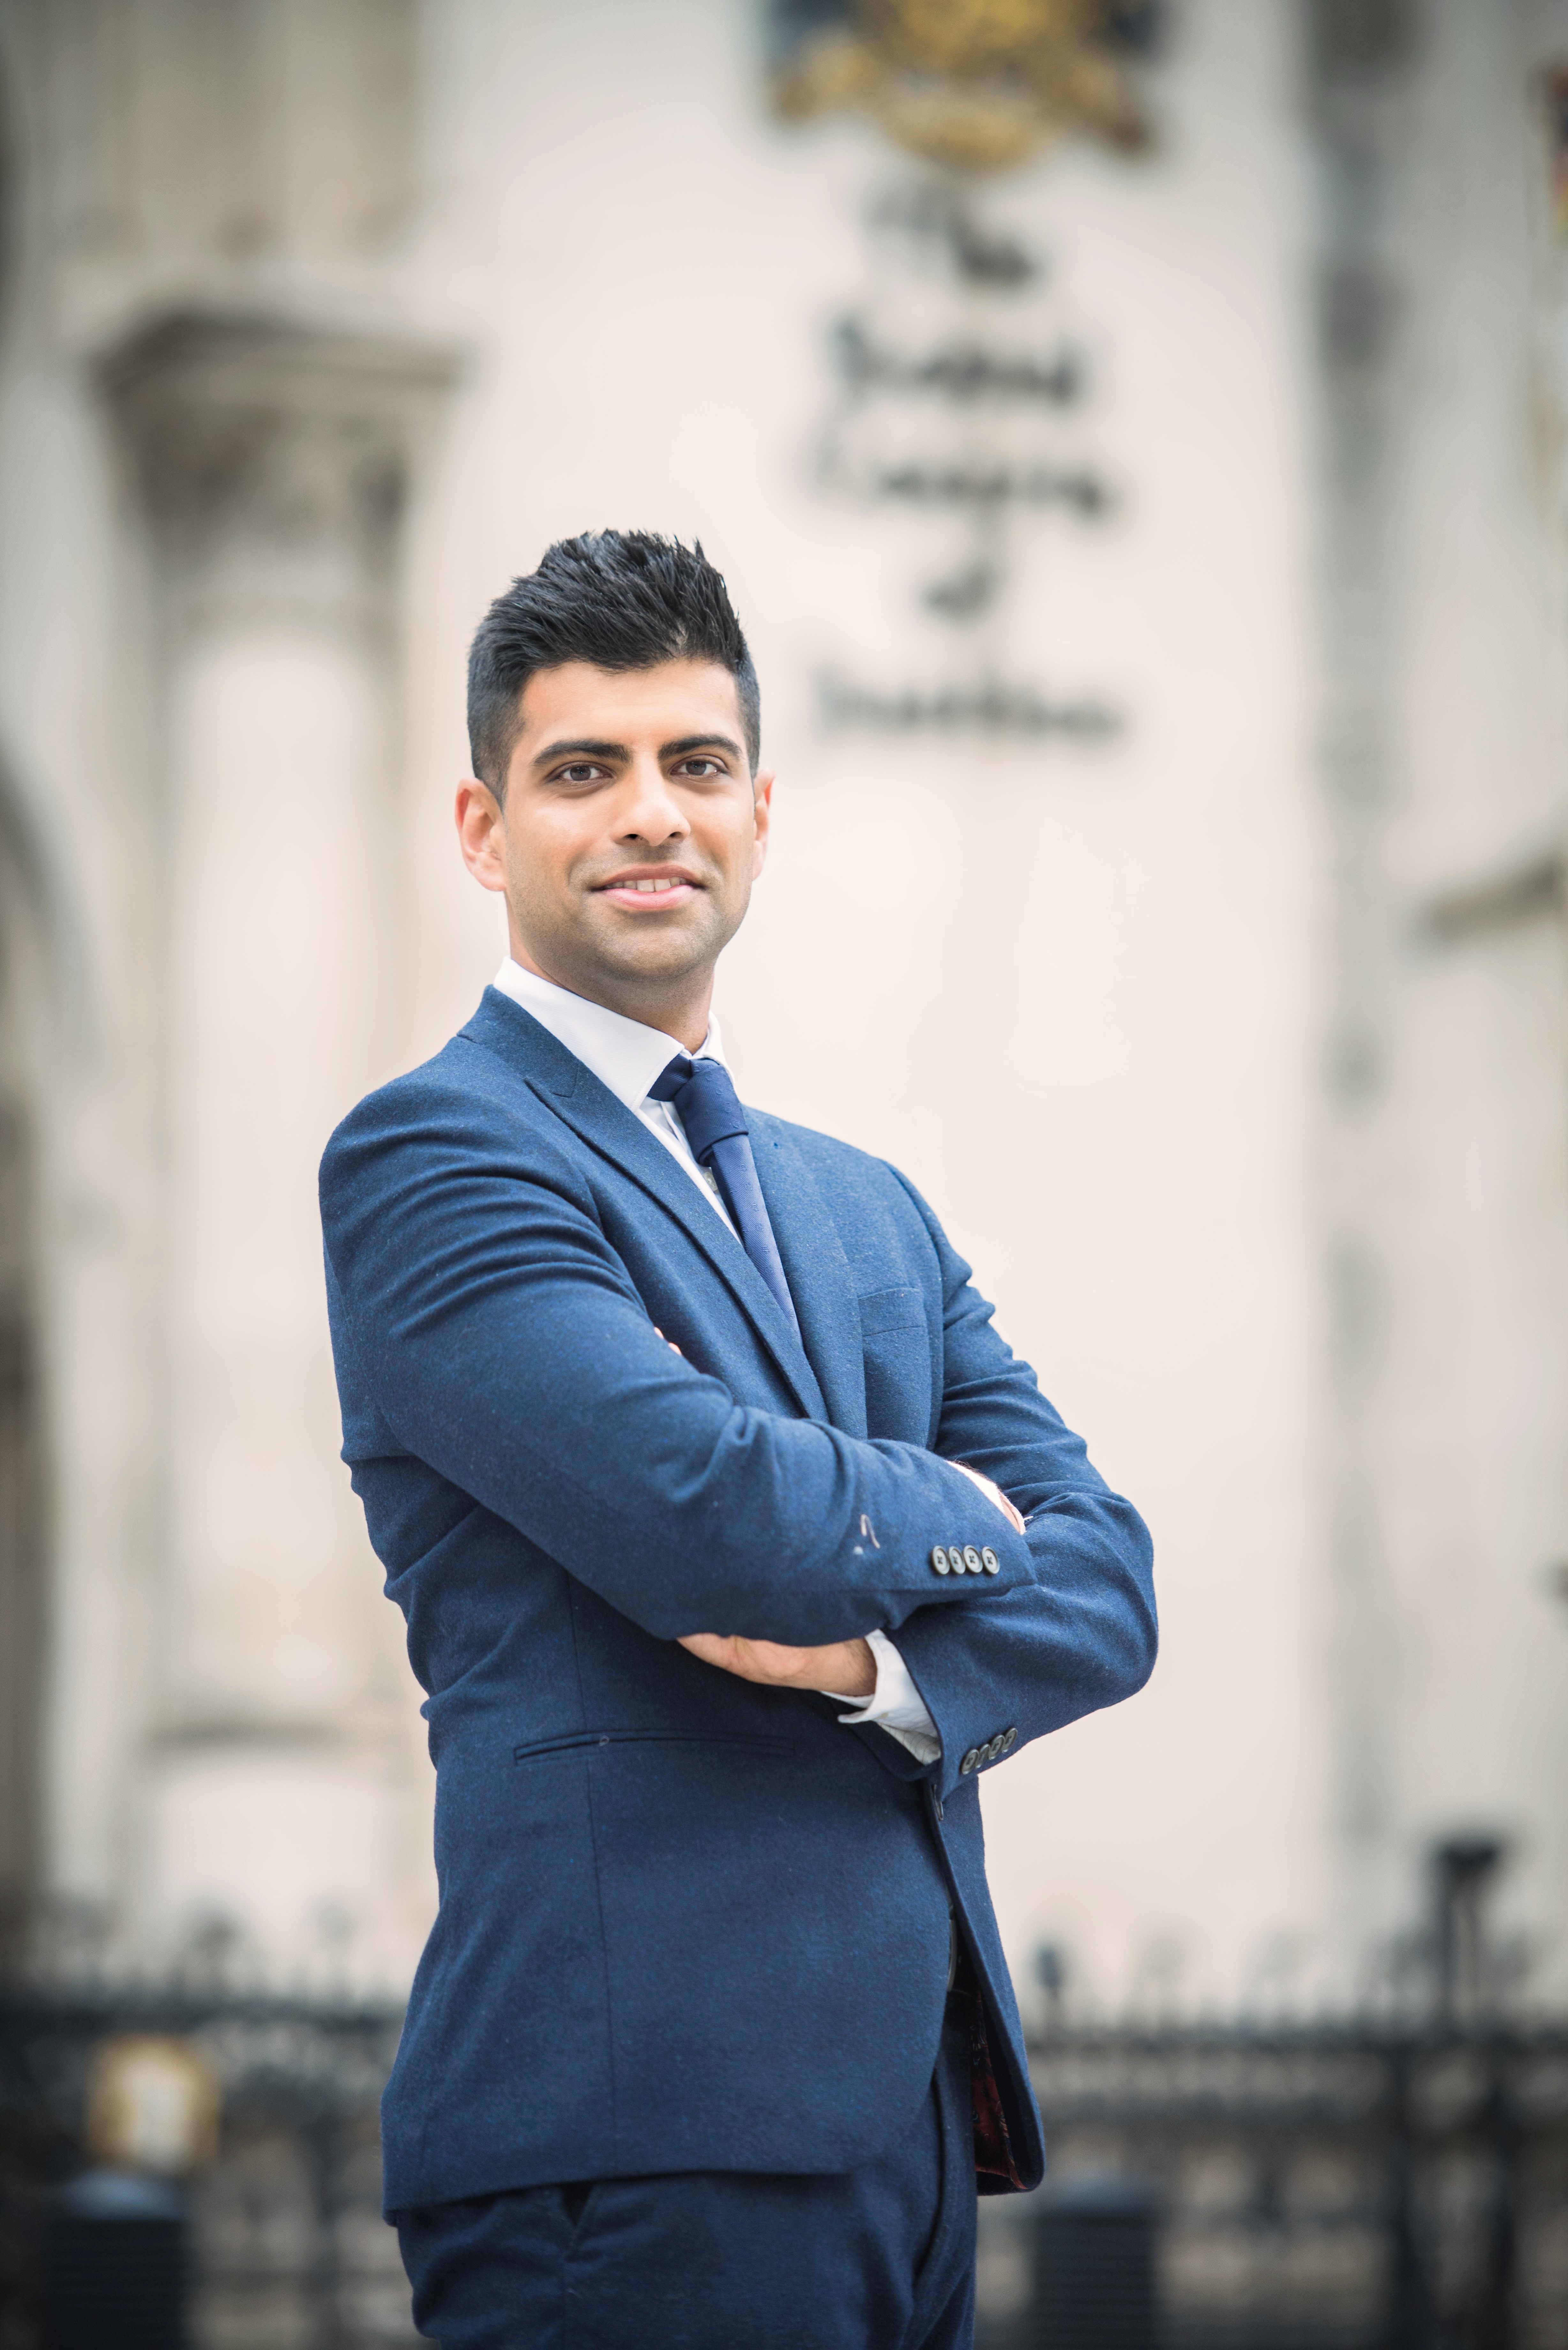 Barrister Pranav Bhanot, 34, who was appointed MBE on the Queen's birthday and was invited to her funeral.  (VineetJohri.com/PA)